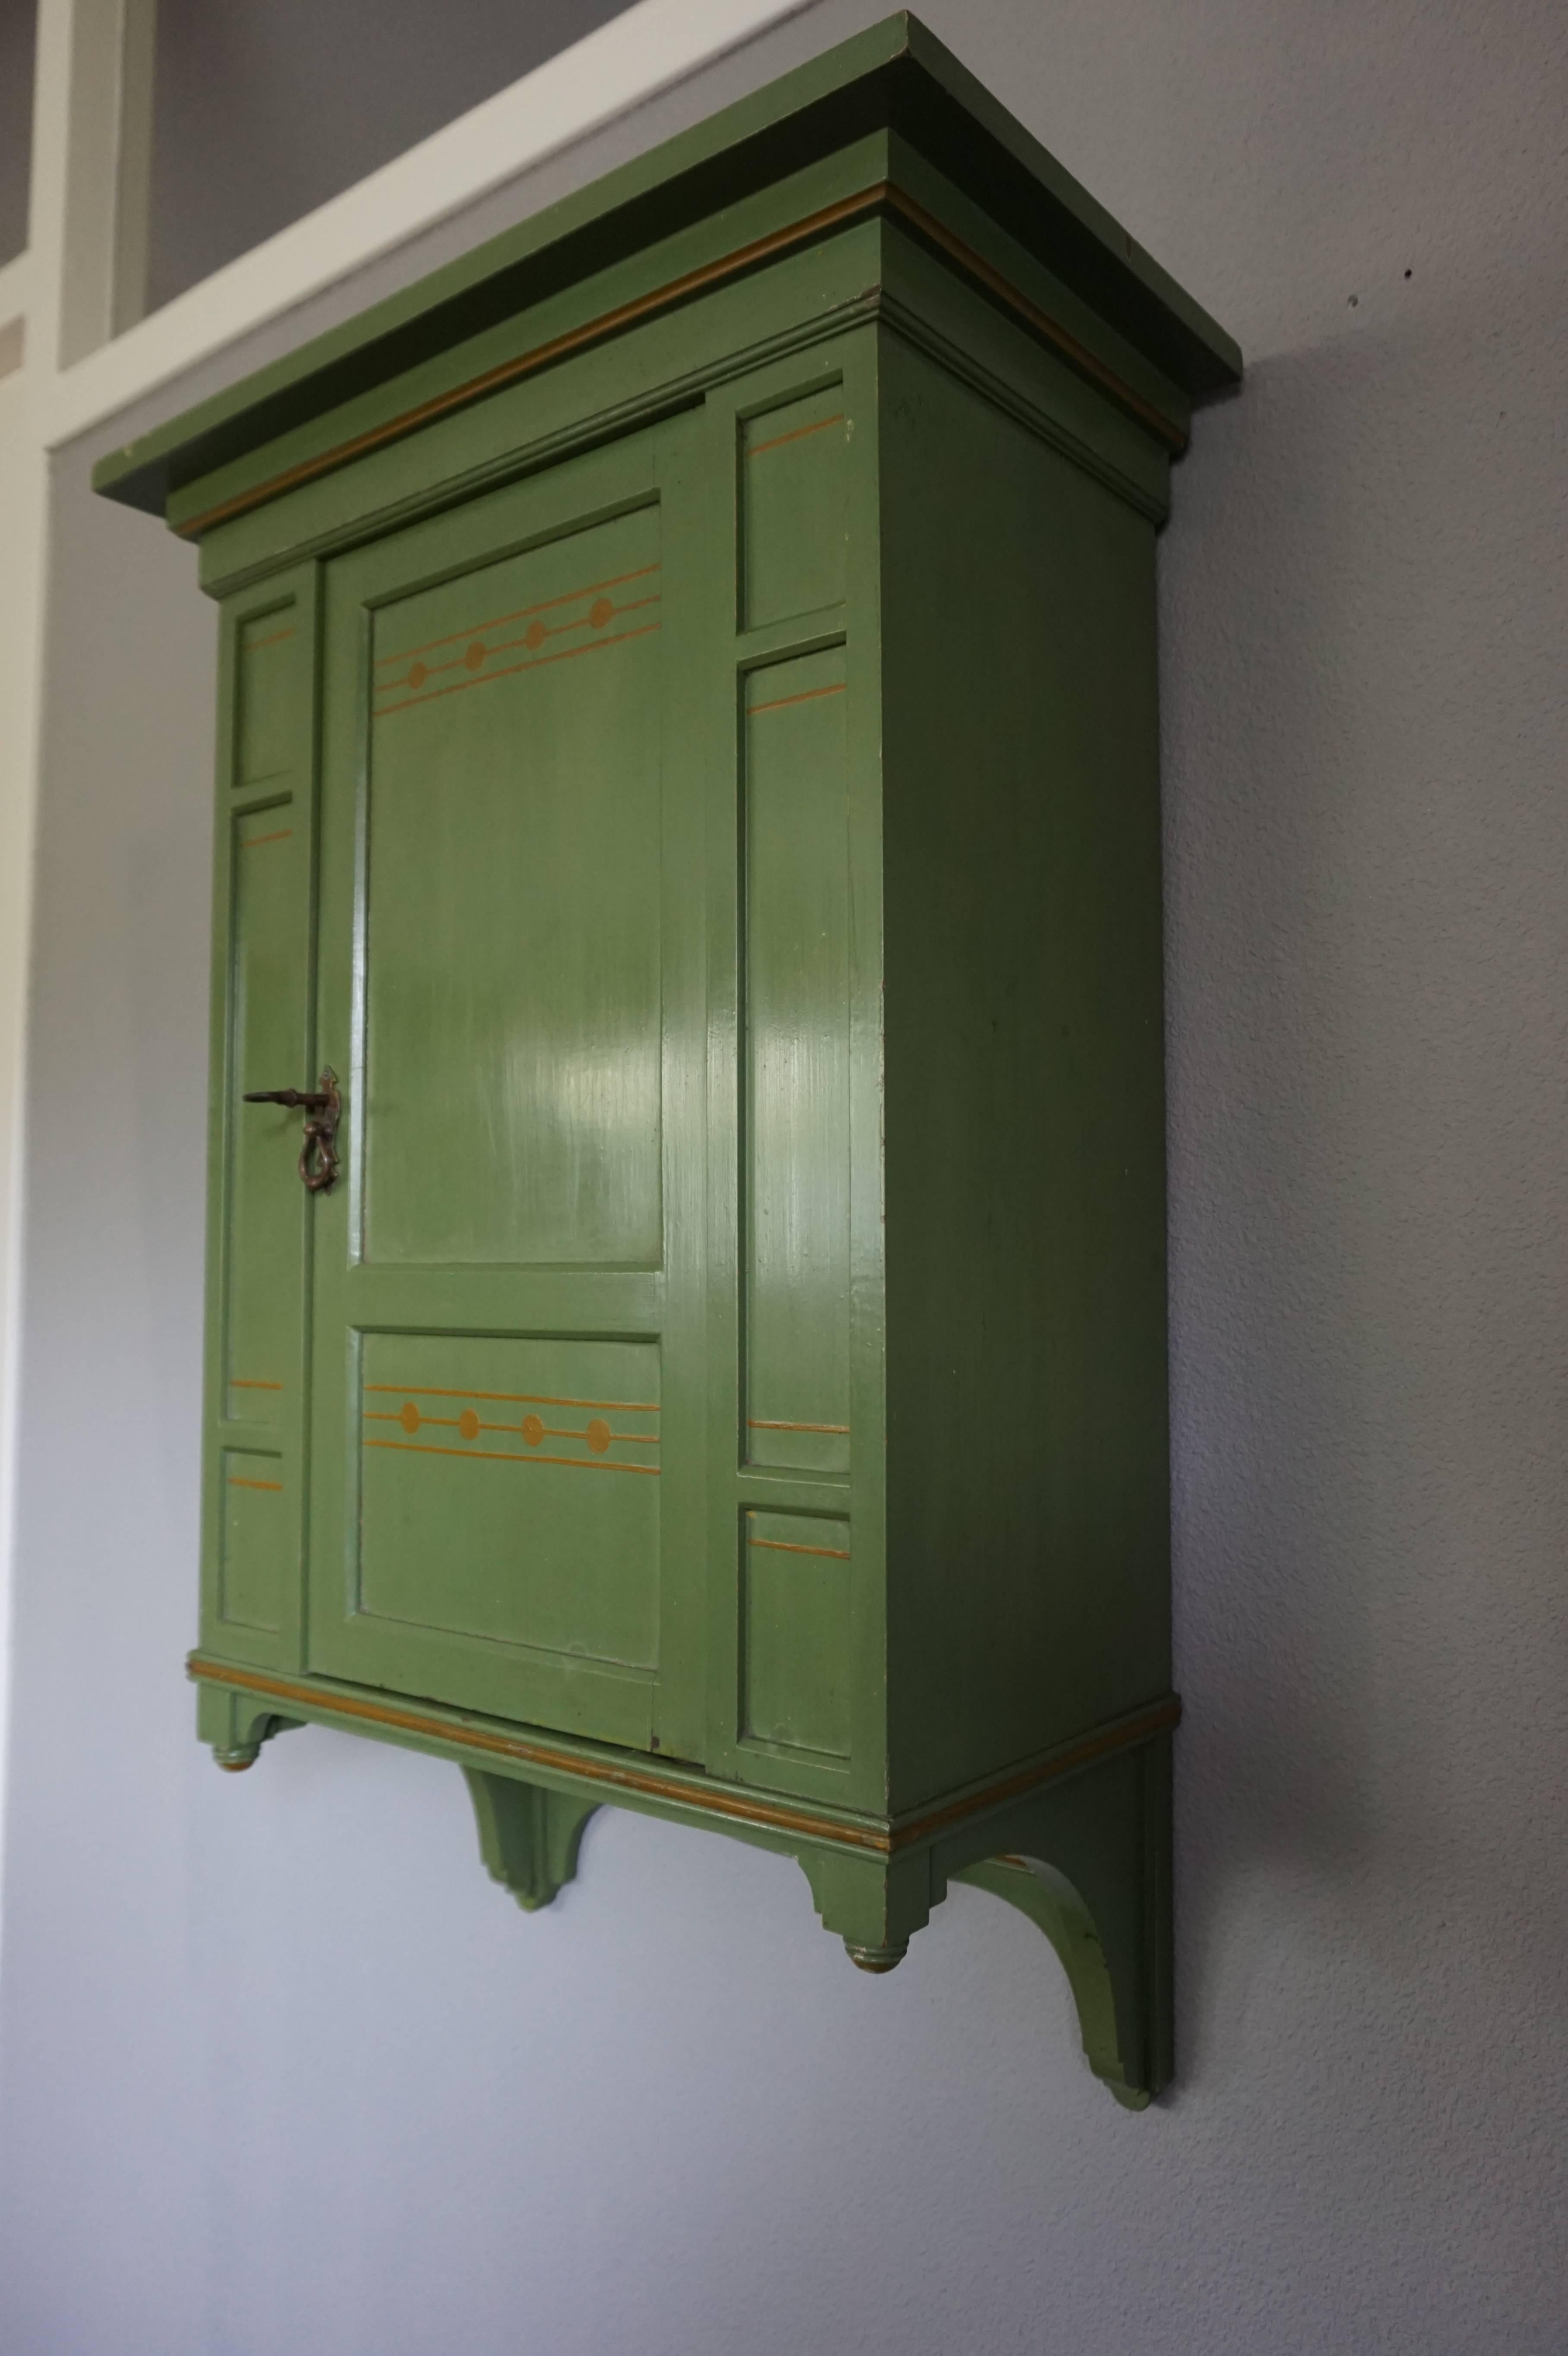 Handcrafted and hand-painted Dutch Jugendstil wall cabinet.

This very stylish and handcrafted wall cabinet from circa 1900 is by one of Hollands best en most renowned furniture makers. These pieces, with the 'Hollandia' mark on the back, in